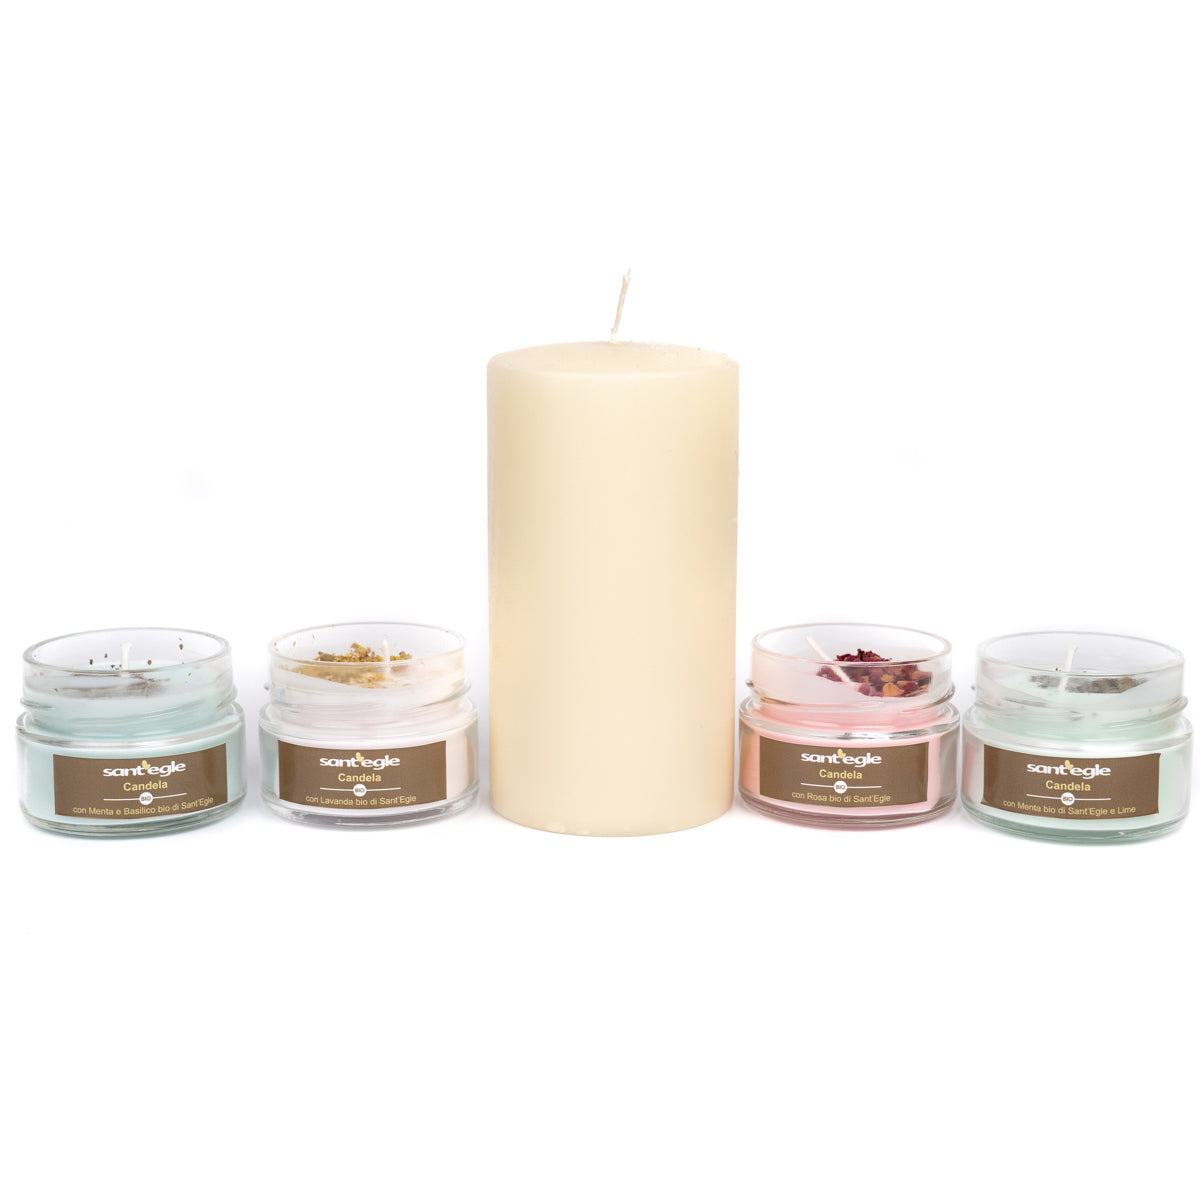 100% natural and organic candle, breathable